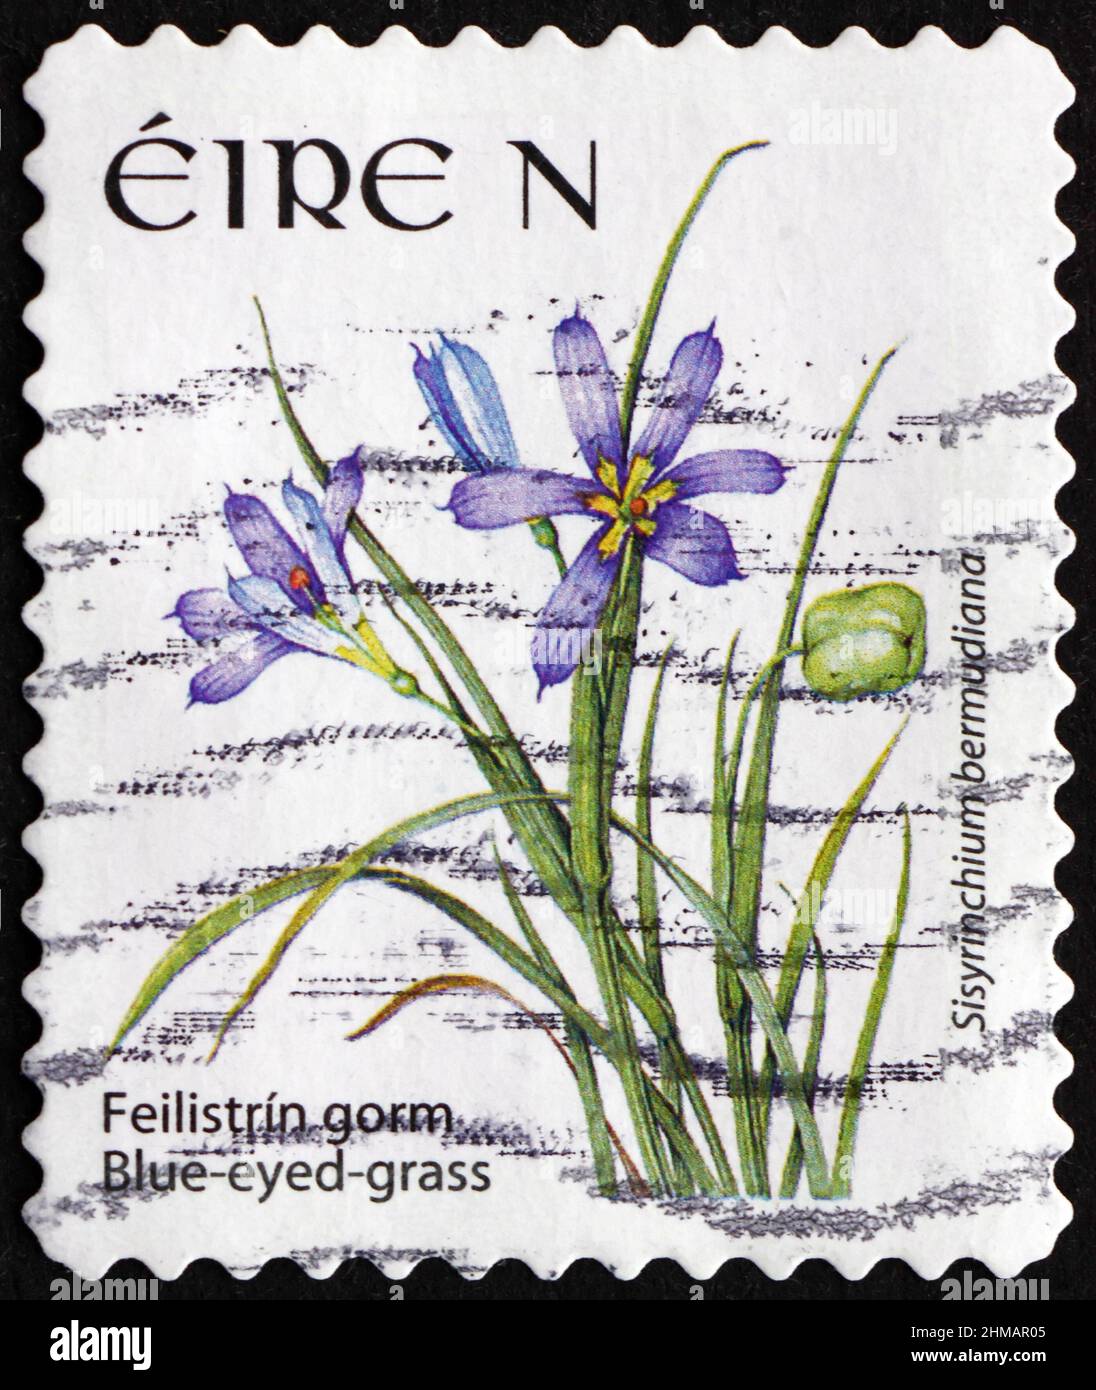 IRELAND - CIRCA 2007: a stamp printed in Ireland shows blue-eyed grass, sisyrinchium bermudiana, is a flowering plant that is indigenous to the Atlant Stock Photo